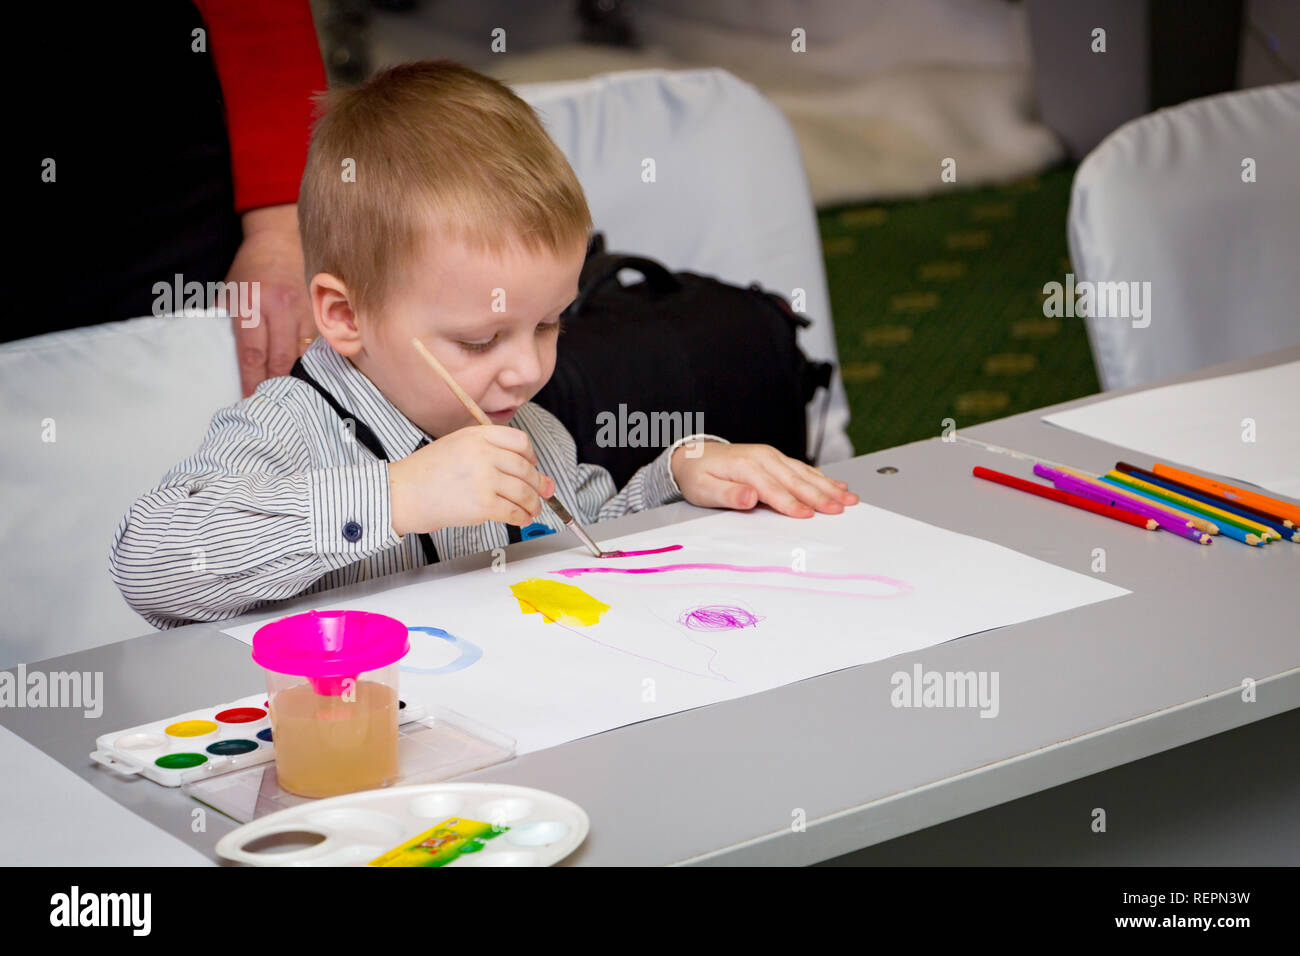 A little boy learns to paint with a brush on a piece of paper sitting at a table Stock Photo